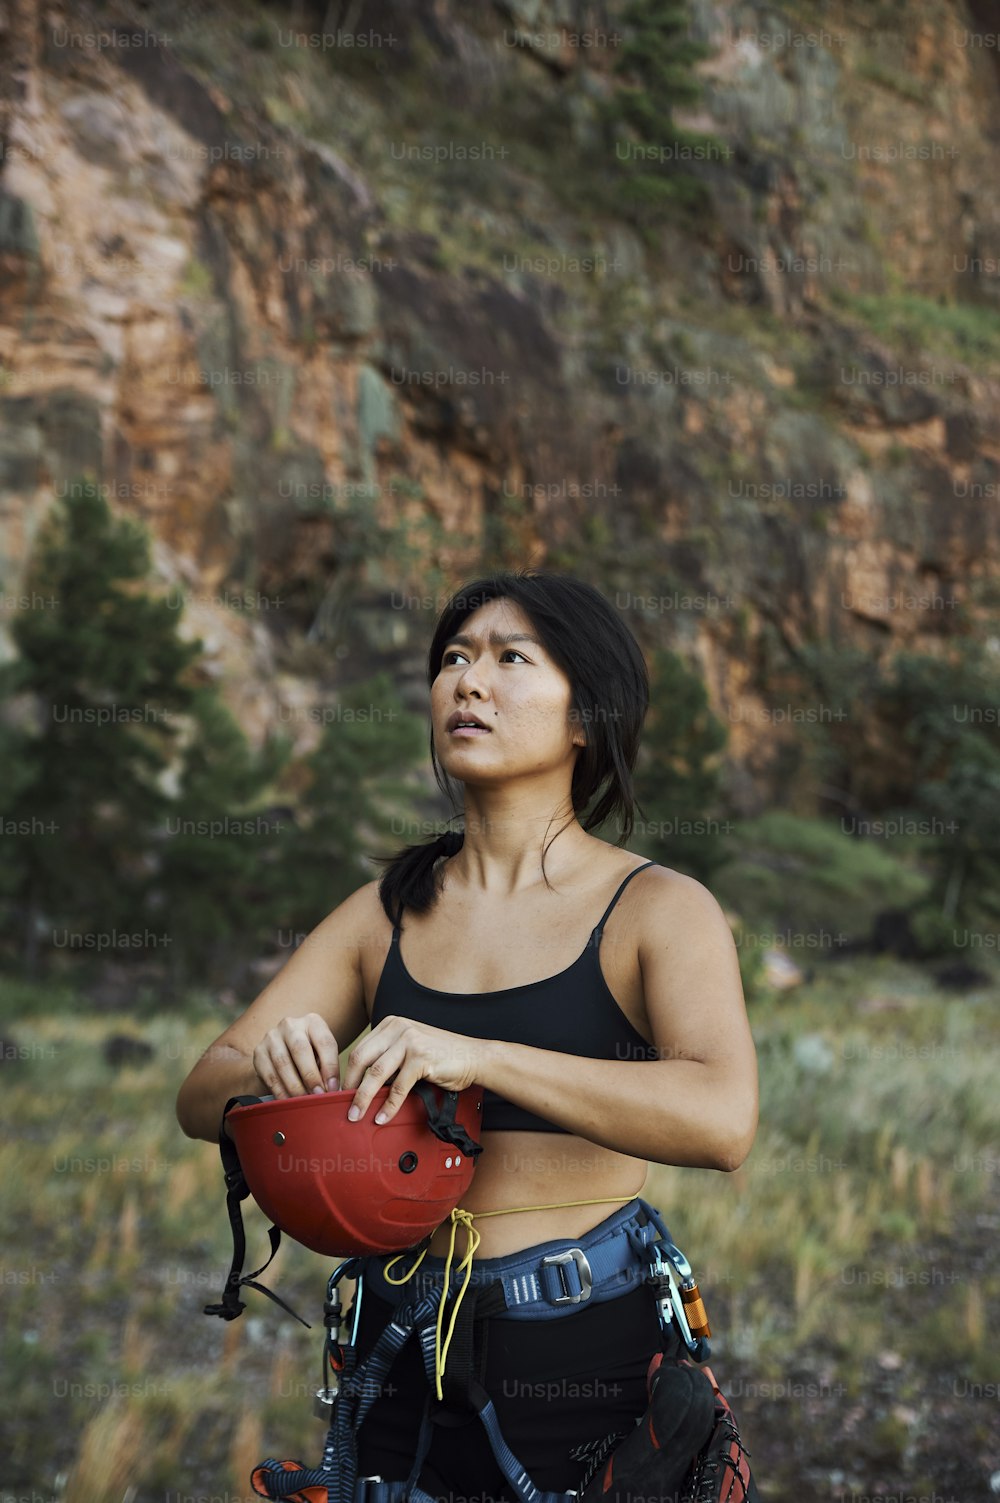 a woman in a black top holding a red helmet